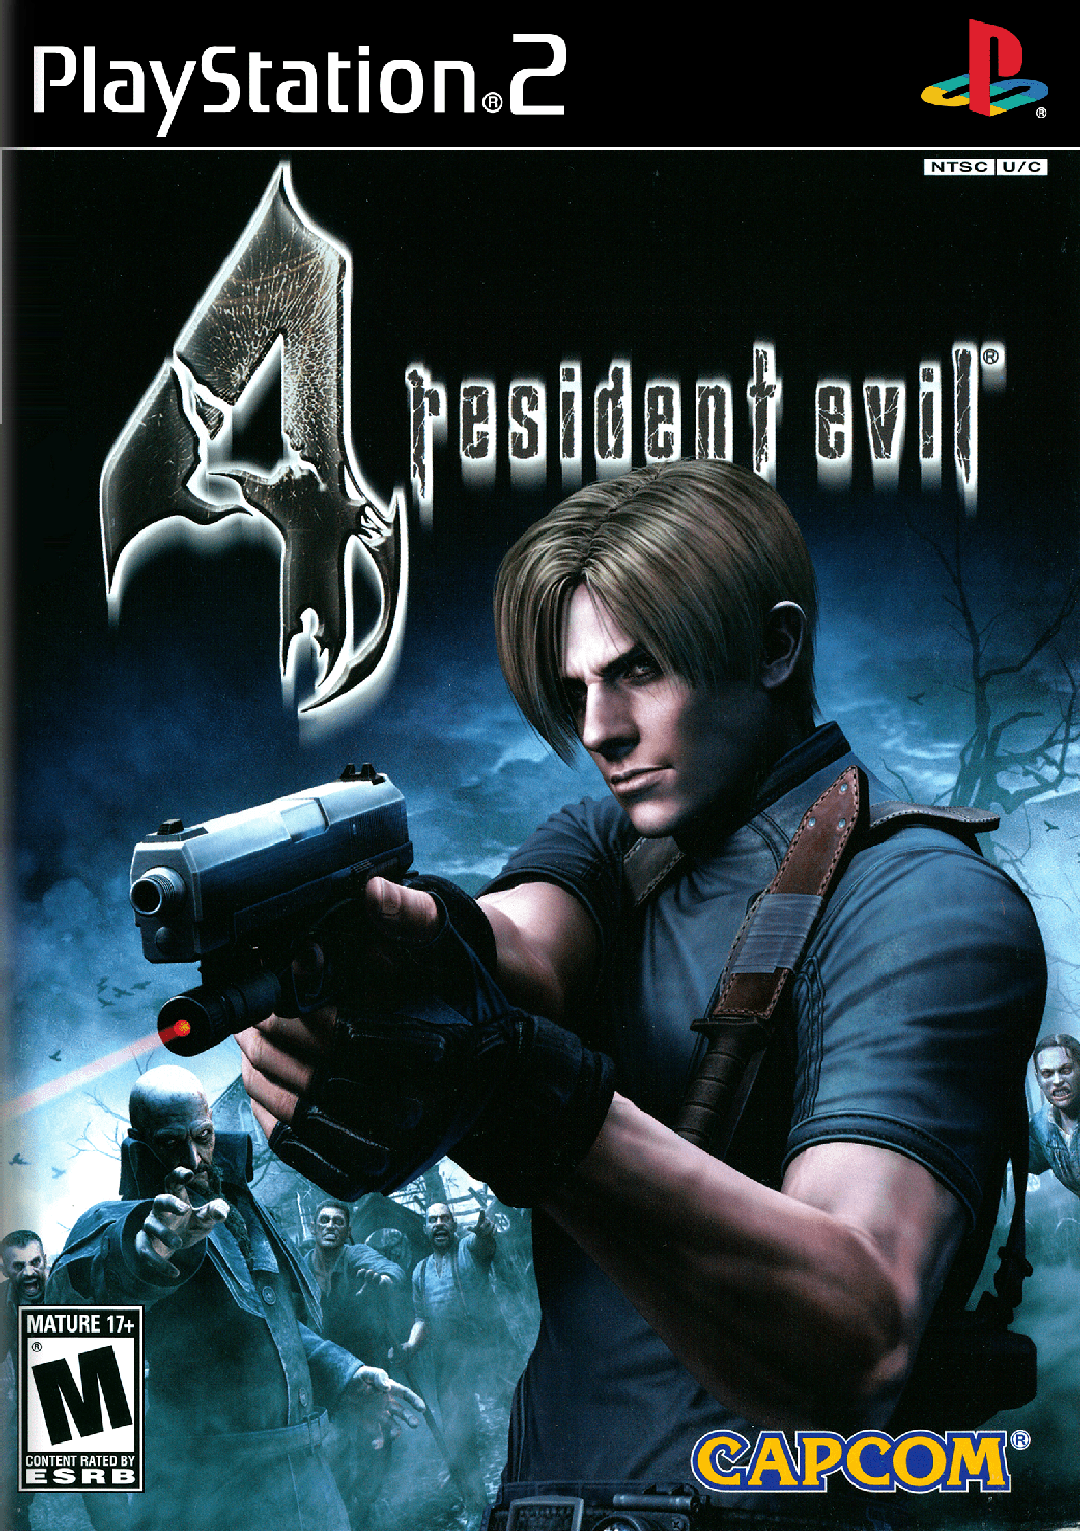 Is Resident Evil 4's Leon S. Kennedy Italian? An investigation